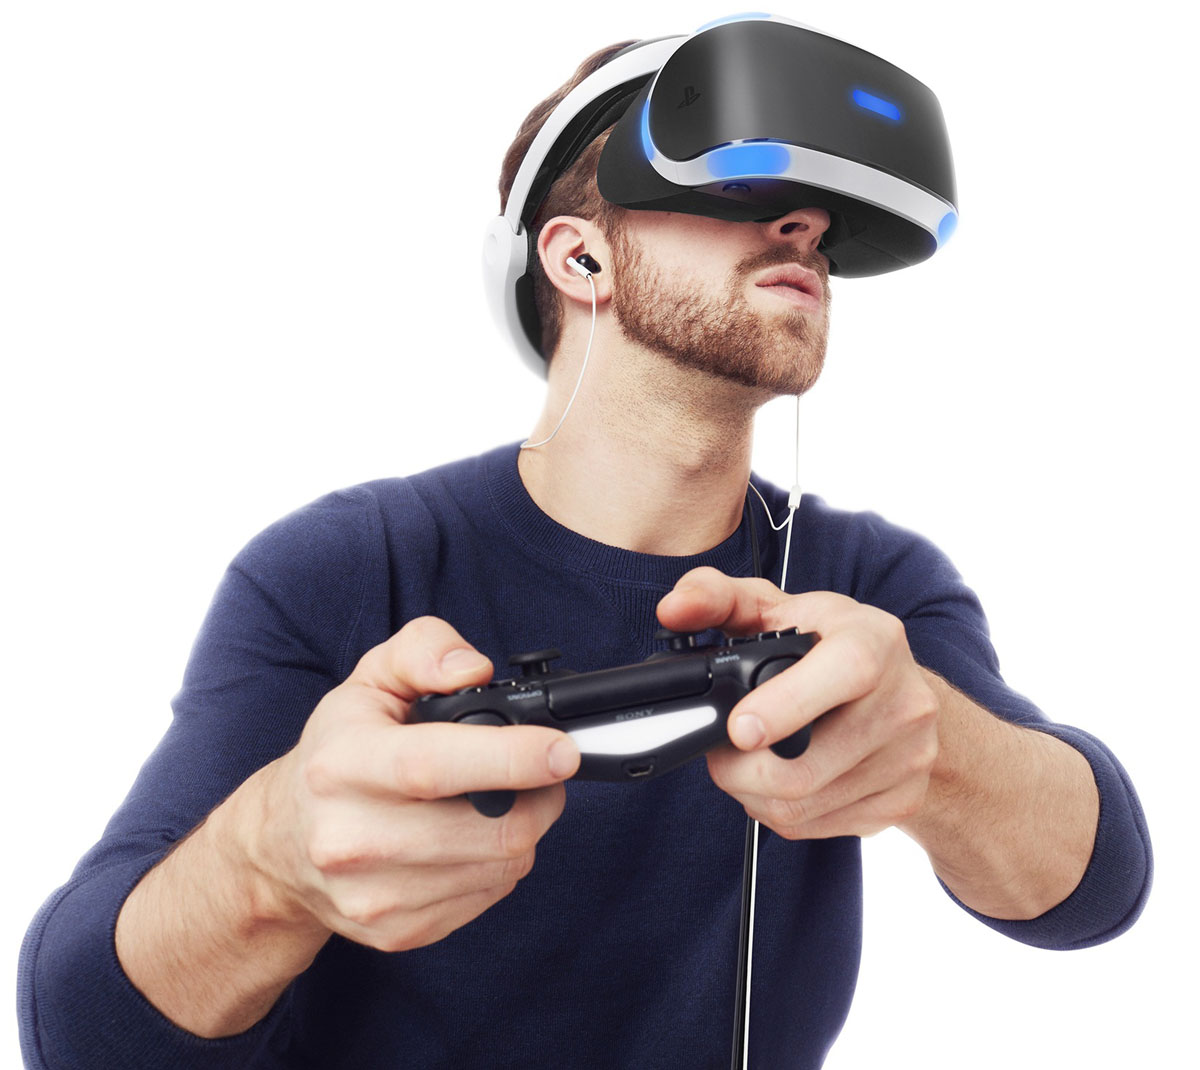 Can Other Headphones Be Used with PlayStation VR?